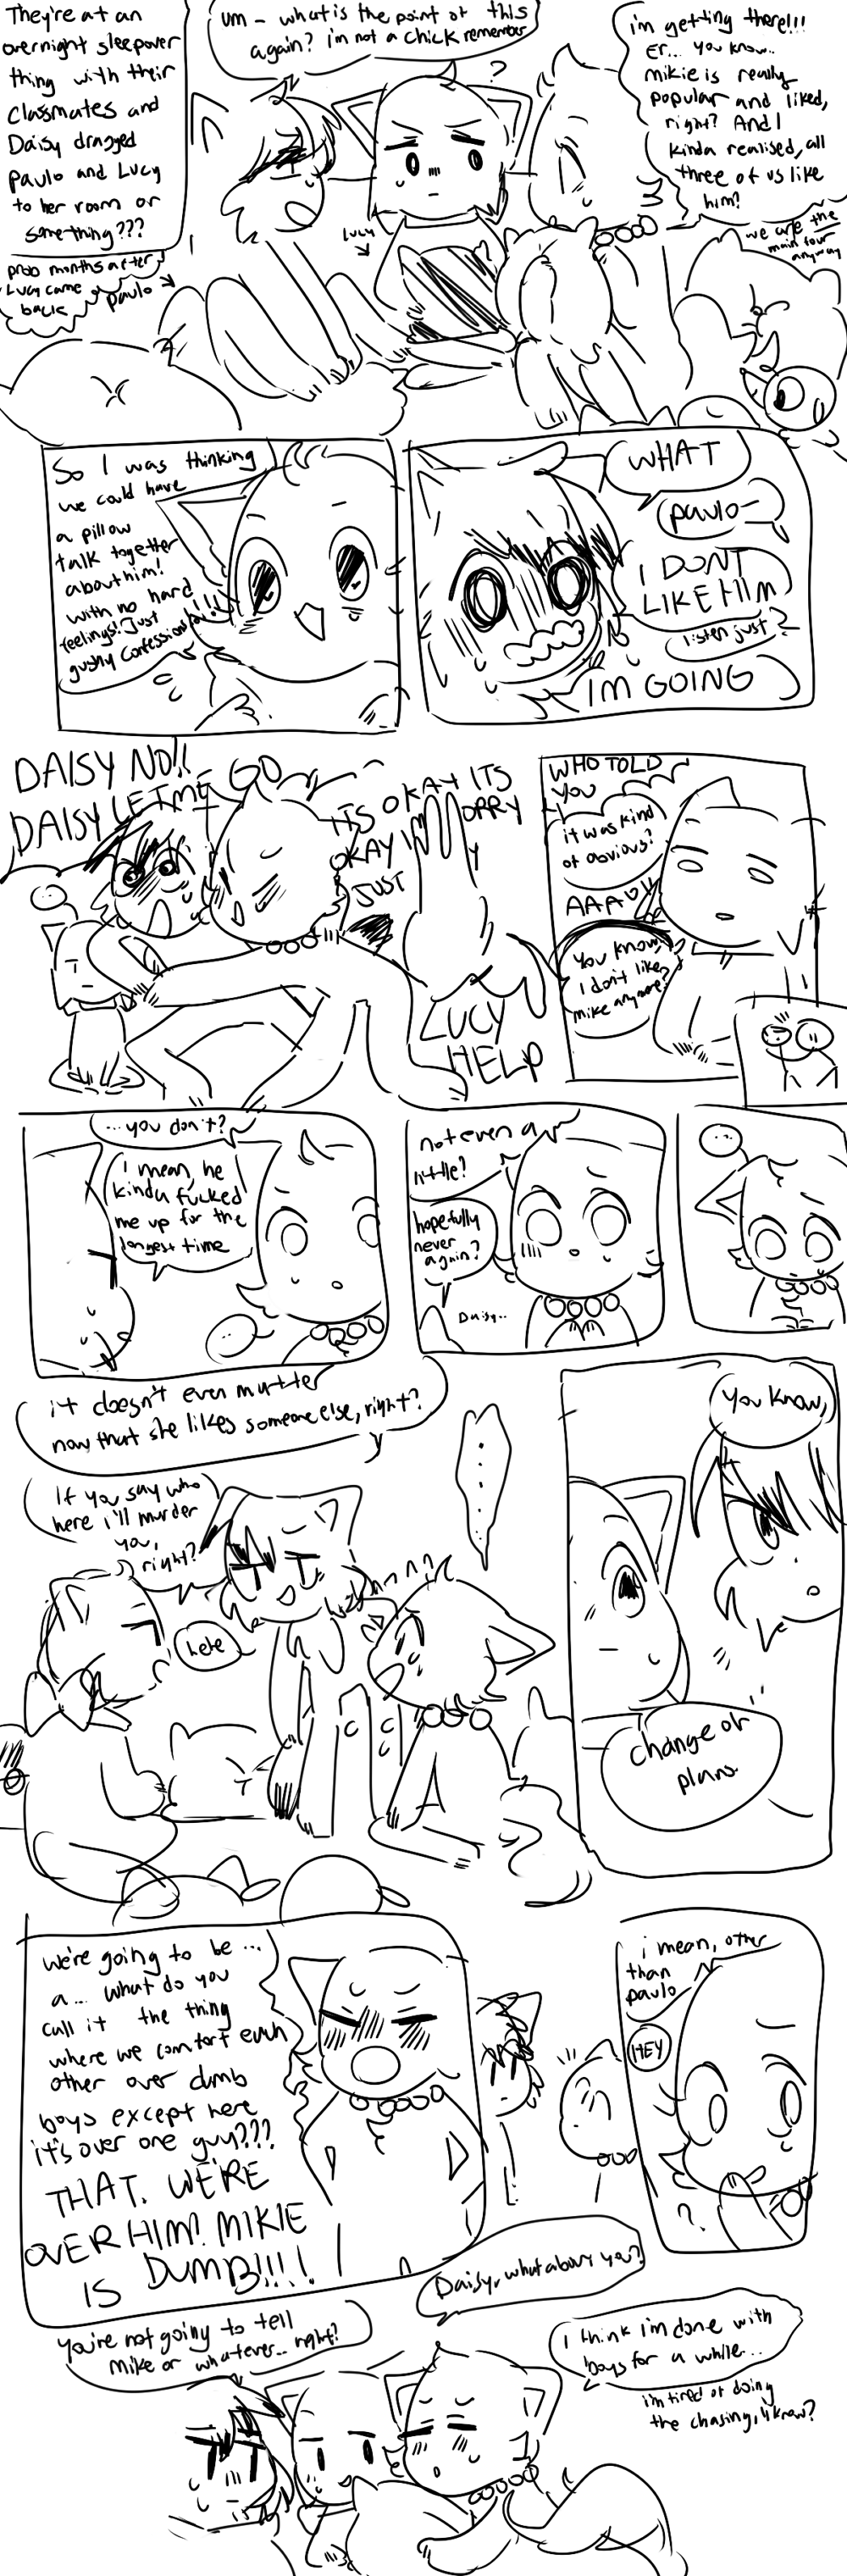 Candybooru image #11669, tagged with Daisy Lucy Lullaby_(Artist) MikexPaulo Paulo comic excellent